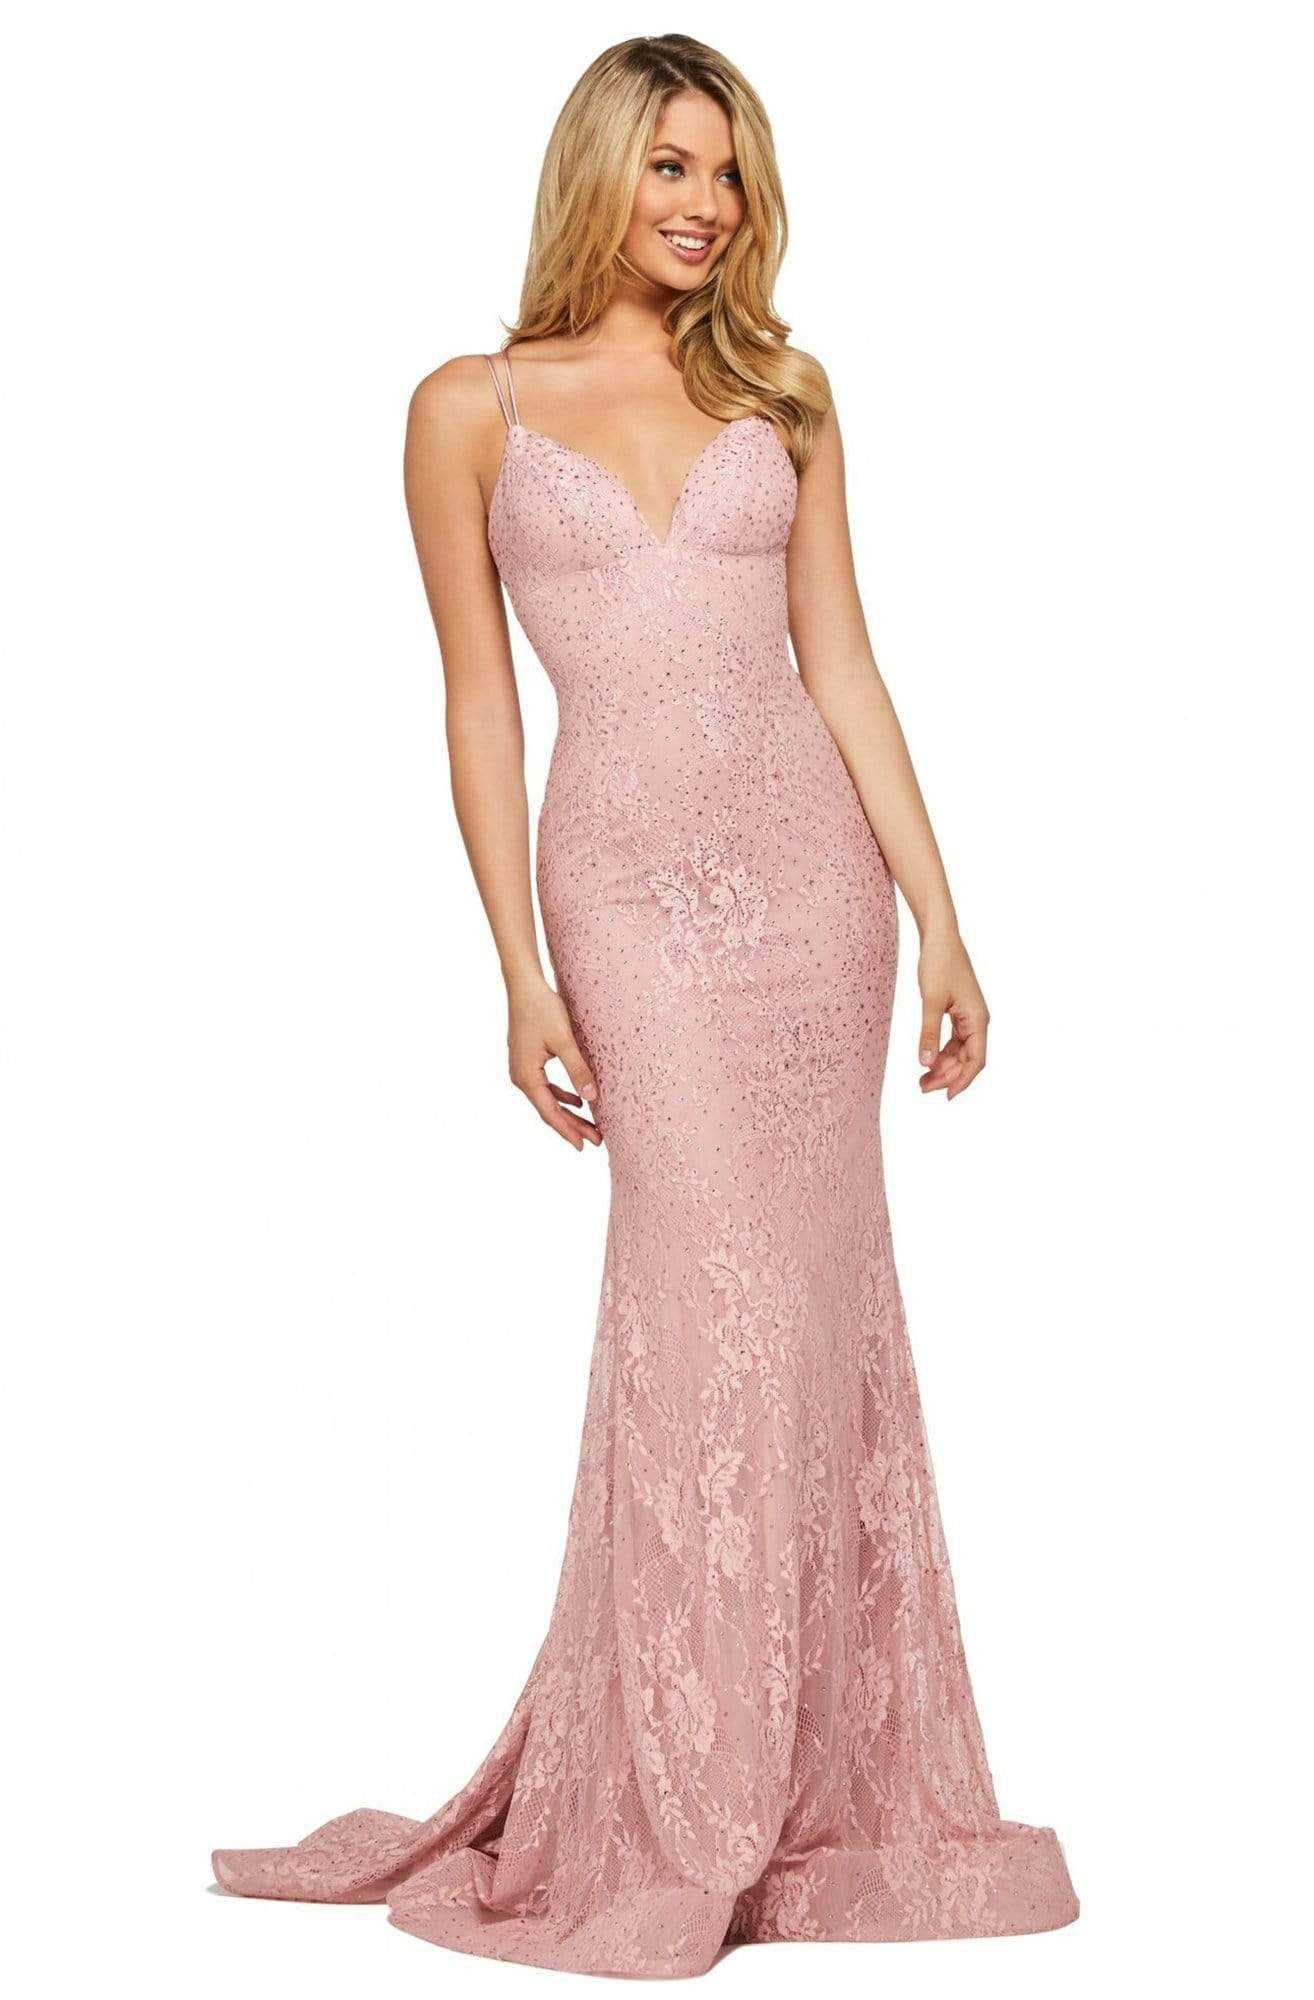 Sherri Hill, Sherri Hill - 53364 Plunging Lace Up Back Fitted Lace Dress